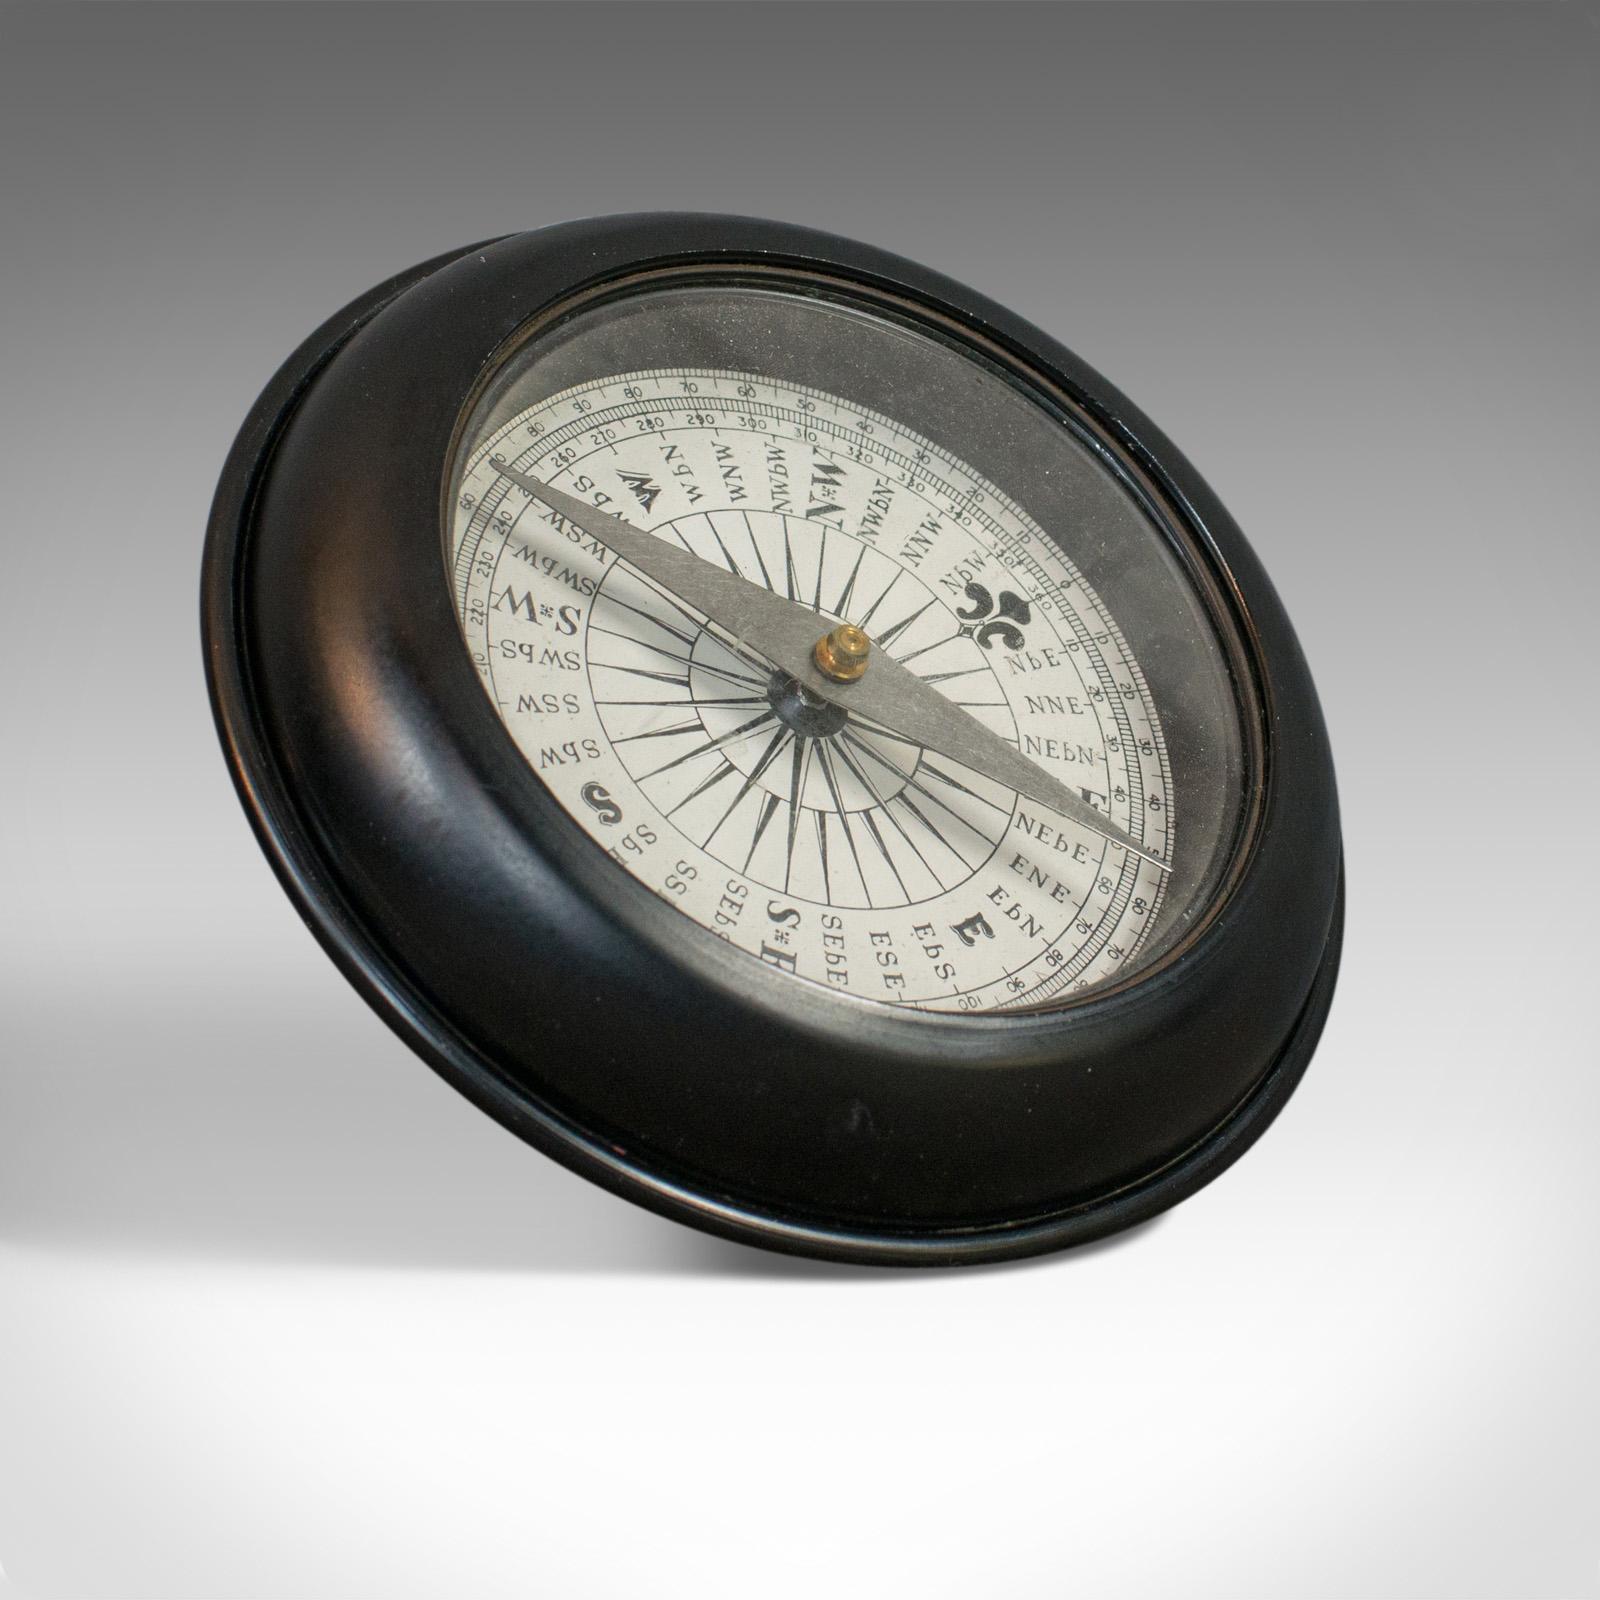 This is a vintage ship's compass. An English, steel, maritime navigation compass dating to the mid-20th century, circa 1950.

Displaying a desirable aged patina and a consistent color throughout
Pressed steel design with sealed compass